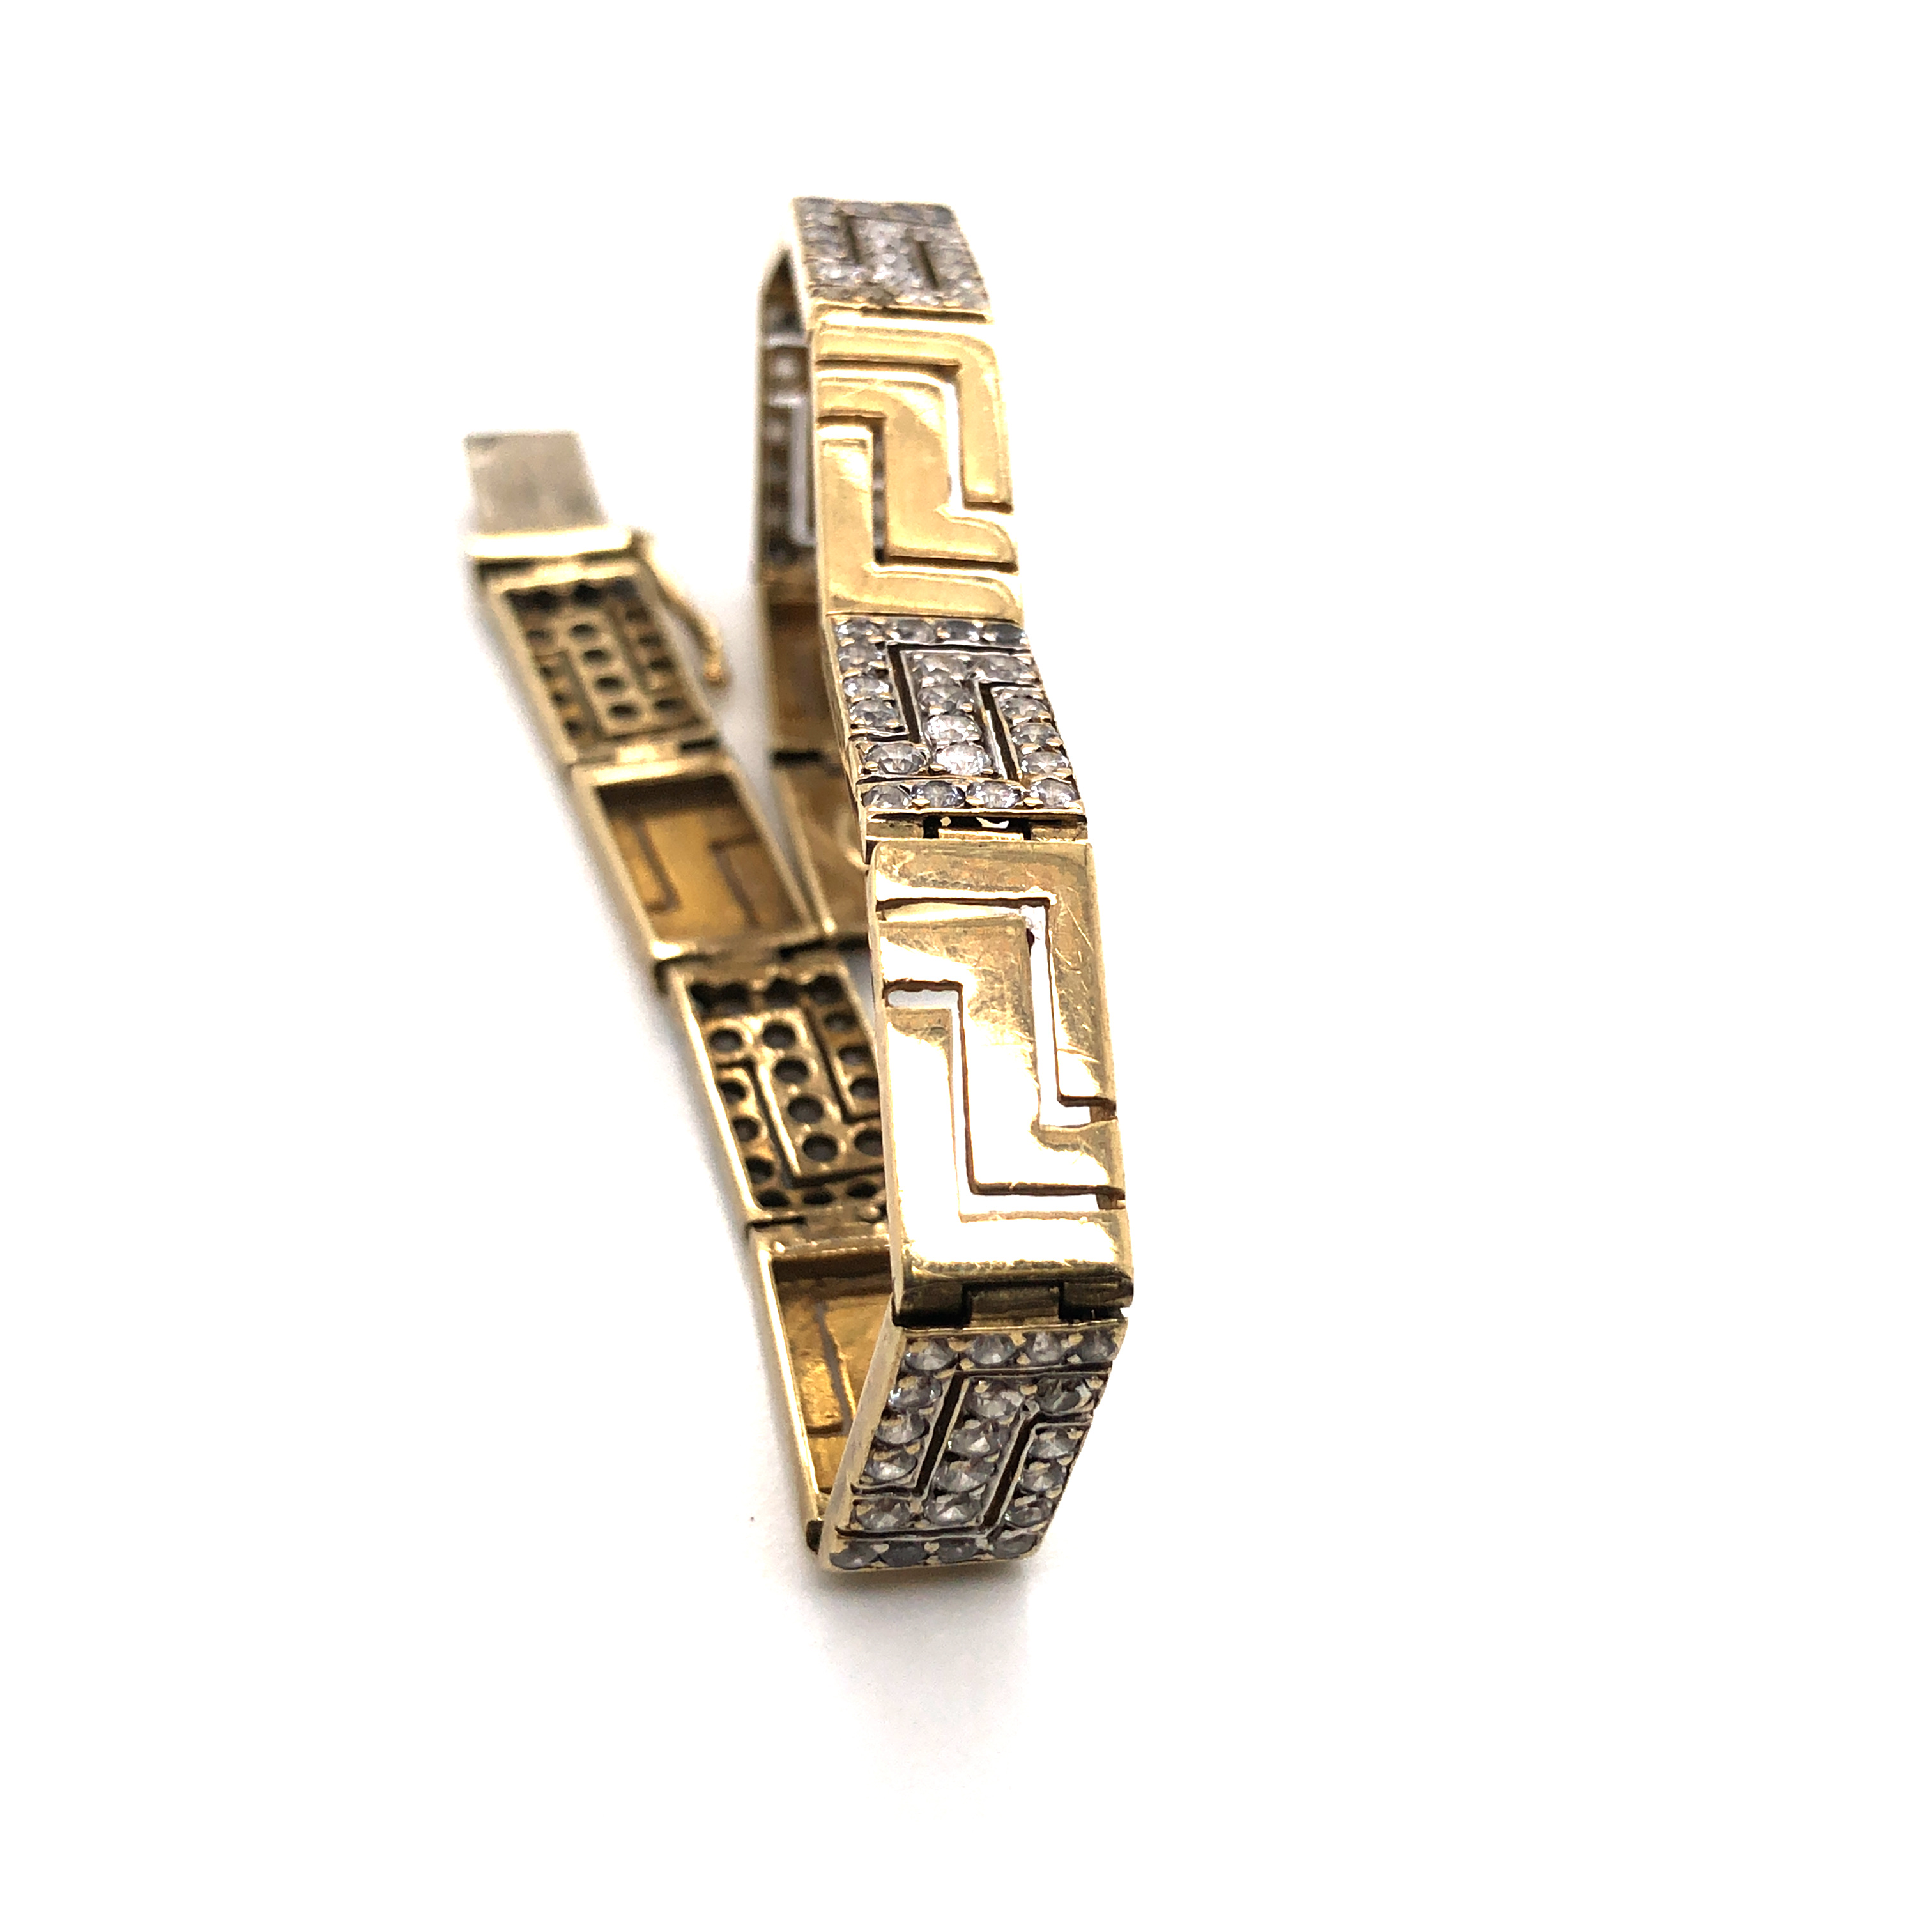 A 9ct HALLMARKED GOLD AND CUBIC ZIRCONIA PANEL BRACELET. SIGNED TOG. LENGTH 20cms. WEIGHT 16.6grms. - Image 3 of 3